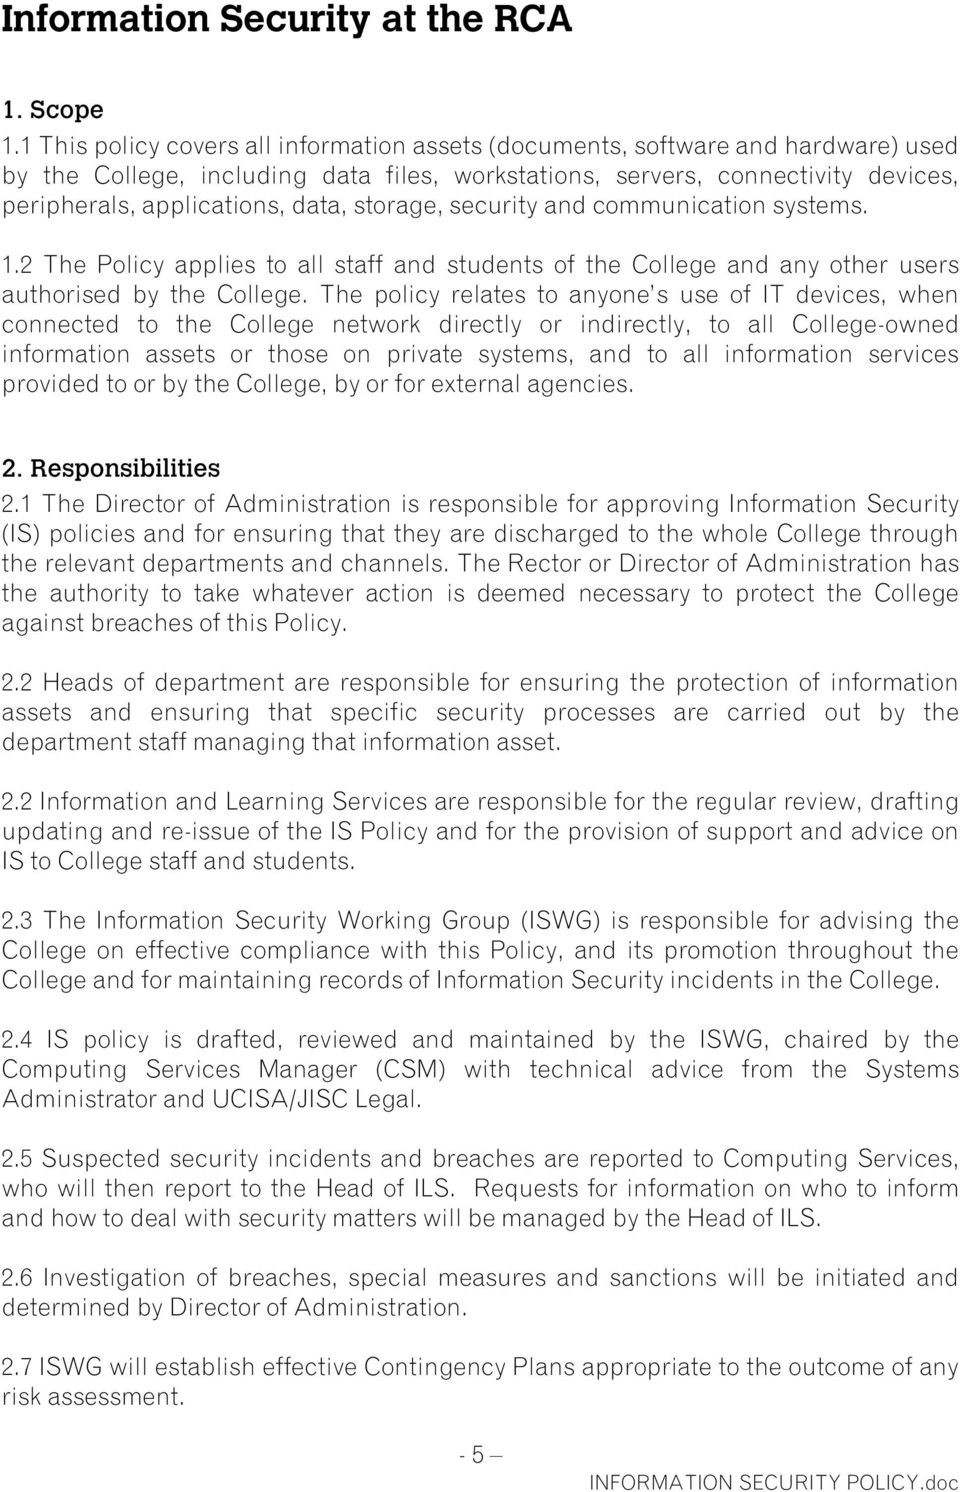 storage, security and communication systems. 1.2 The Policy applies to all staff and students of the College and any other users authorised by the College.